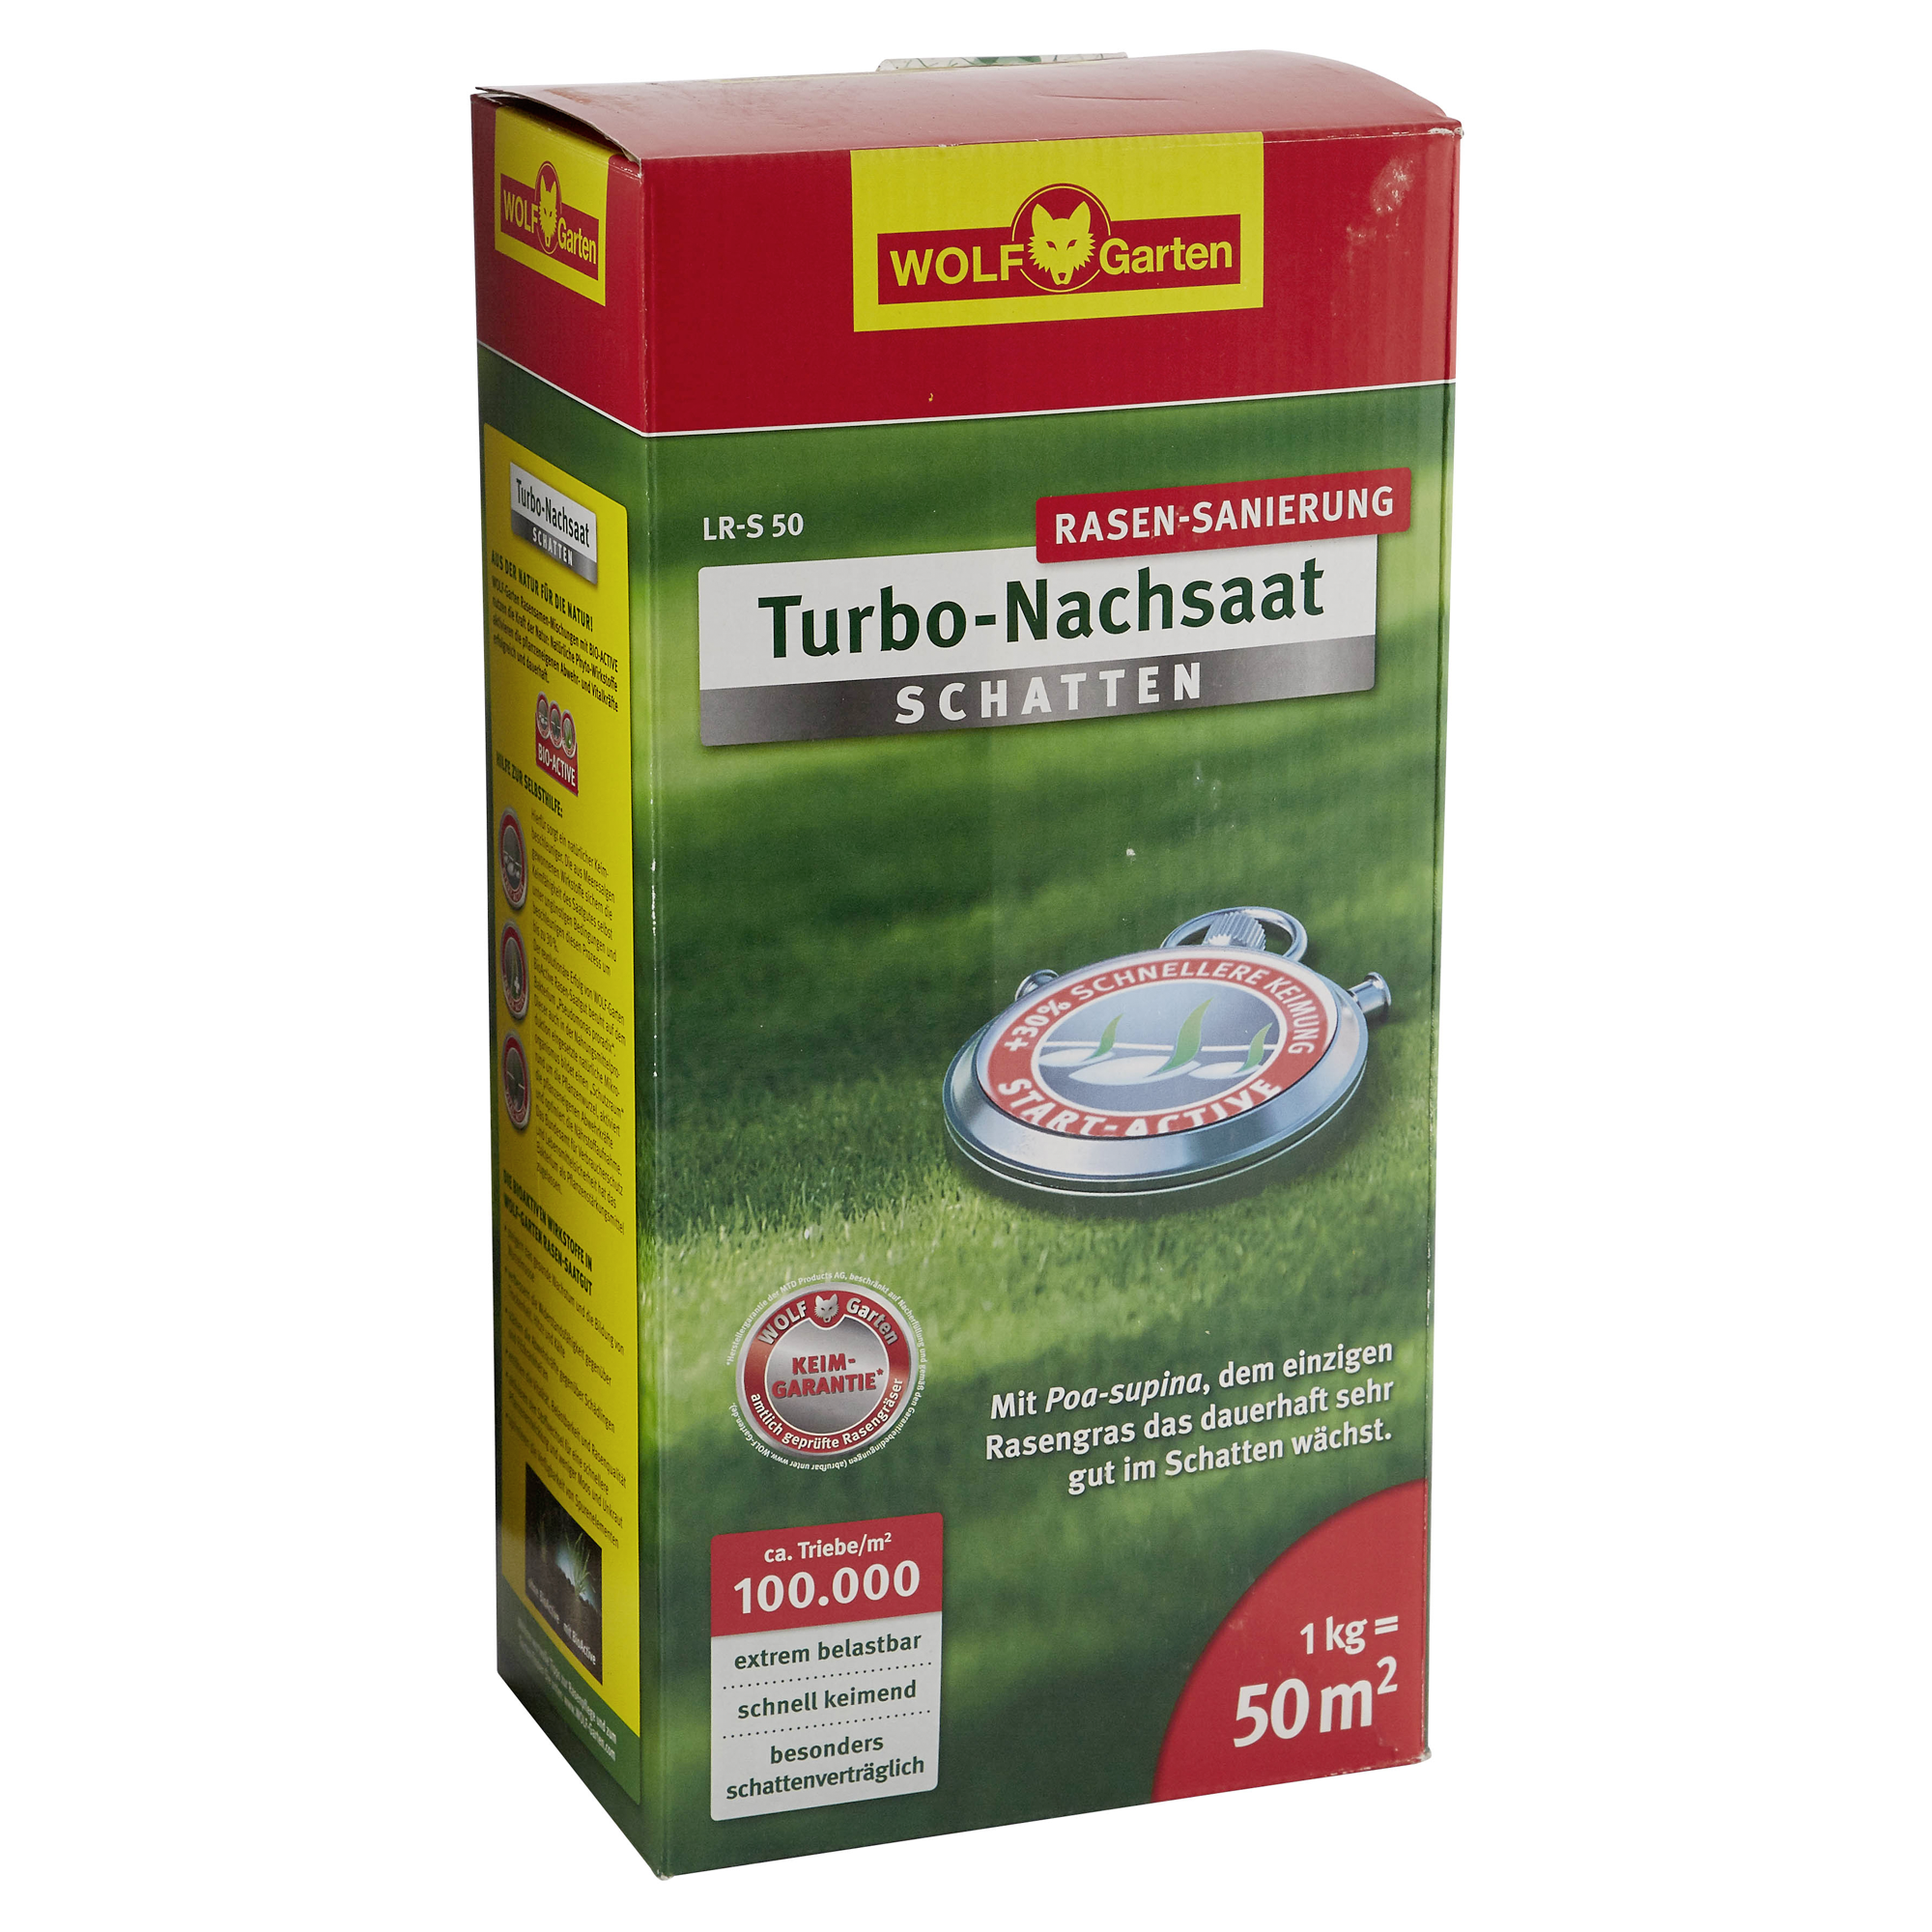 Turbo-Nachsaat Schatten 50 m² 1 kg + product picture